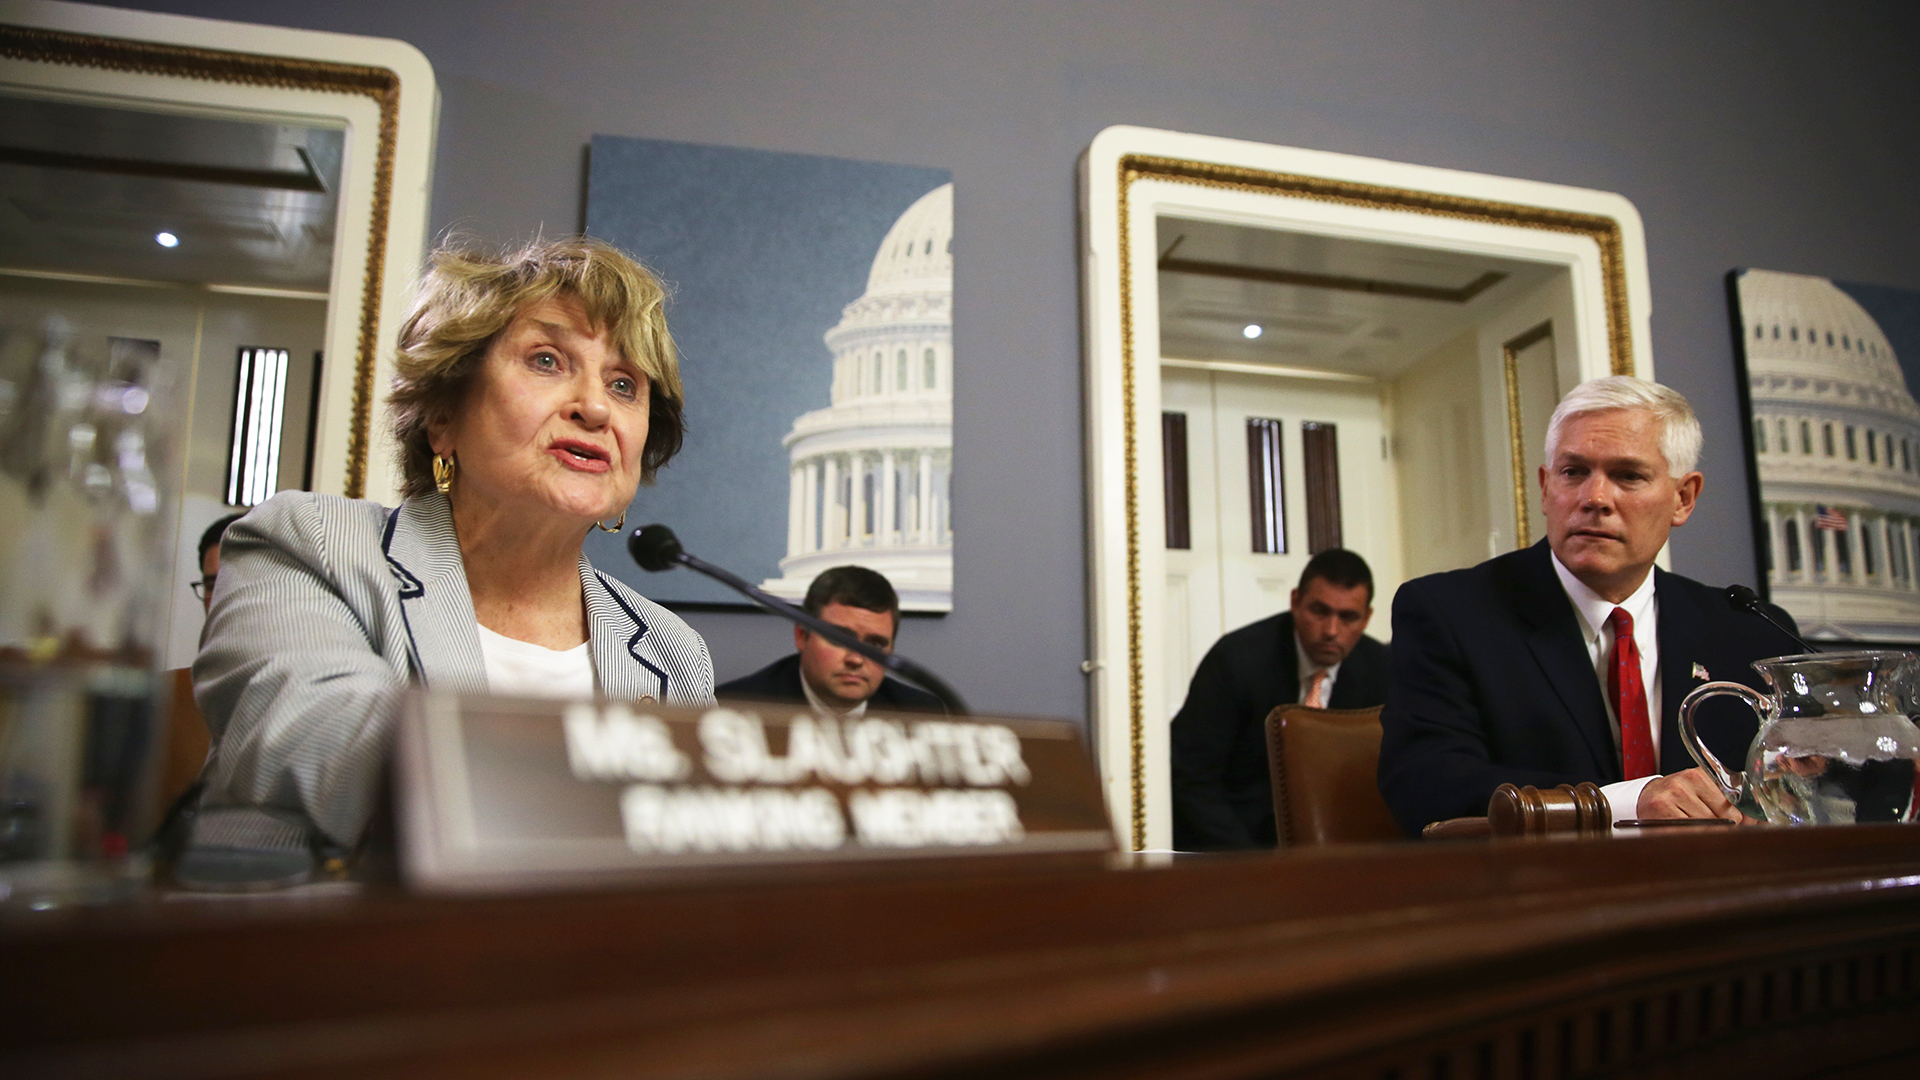 Committee ranking member Rep. Louise Slaughter (D-NY) (L) speaks as committee chairman Rep. Pete Sessions (R-TX) (R) looks on duirng a House Rules Committee meeting August 1, 2014 on Capitol Hill in Washington, DC. The House came back on Friday, a day after its scheduled summer recess, trying to finish up a border supplemental spending bill that was pulled from the floor the day before because of a shortage of votes. 